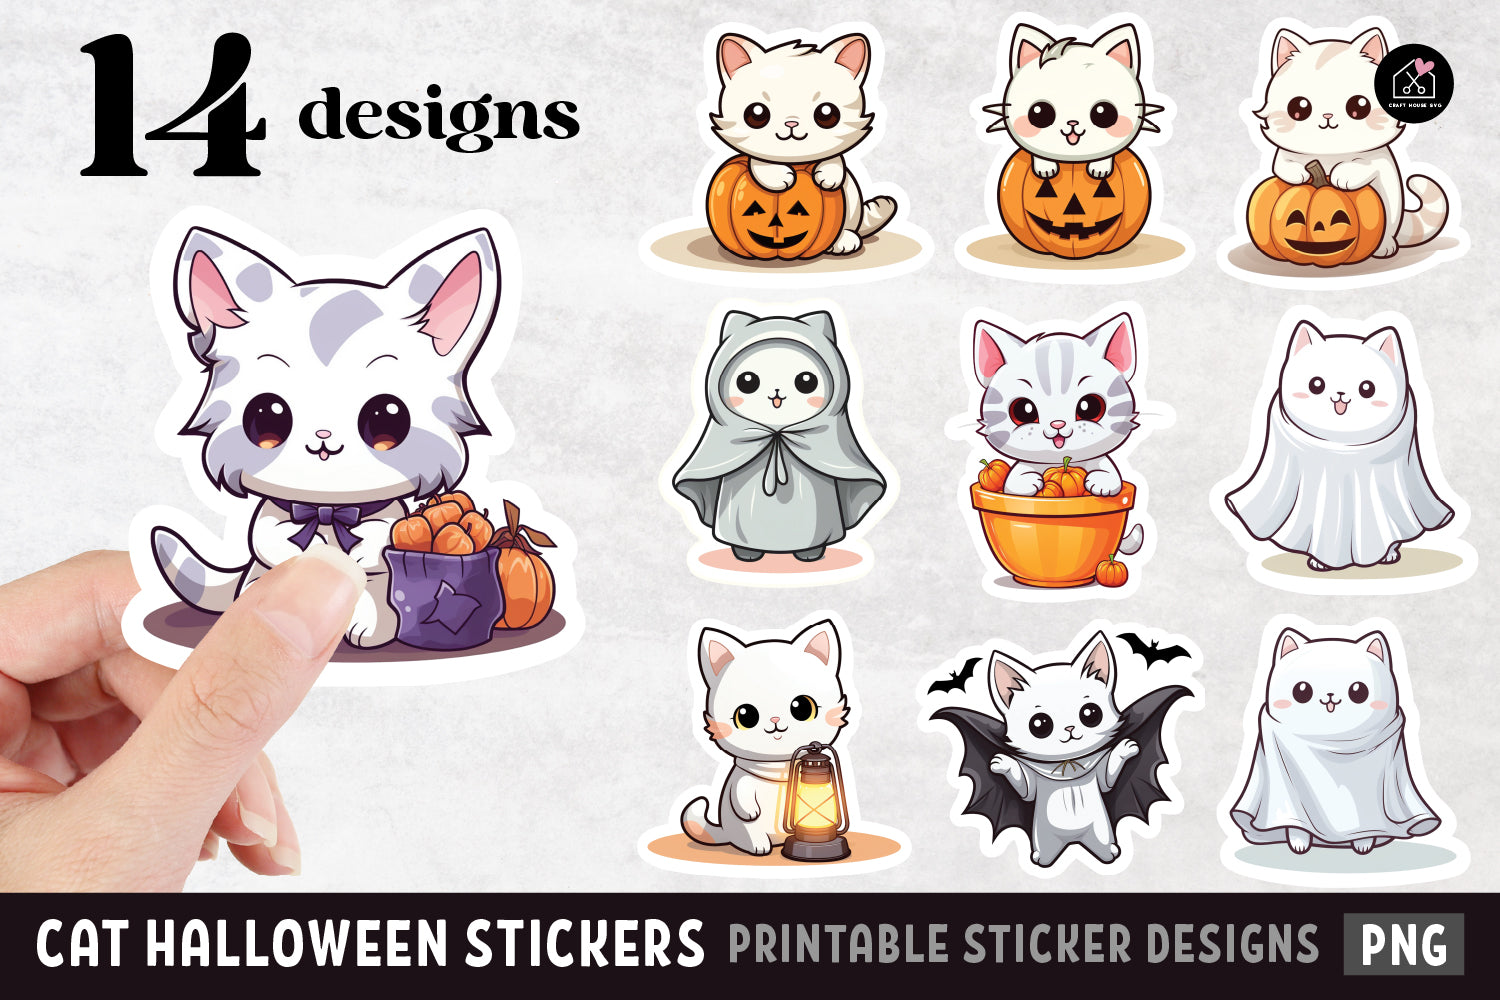 Cat Halloween Stickers PNG Print and Cut Sticker Designs